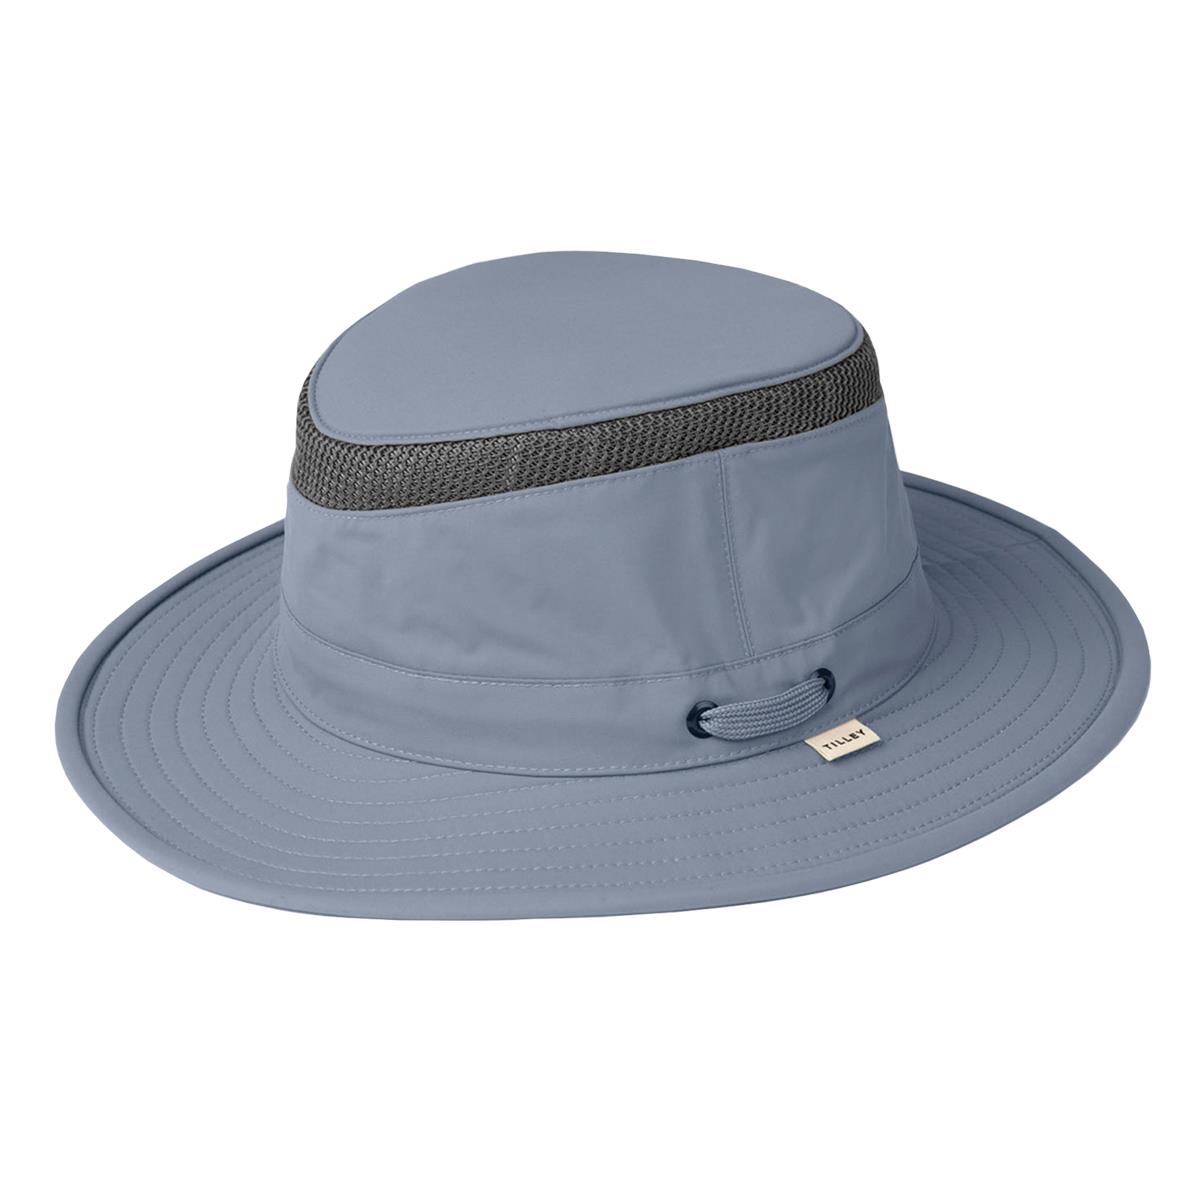 What colors & sizes does the Tilley LTM5 hat come in?